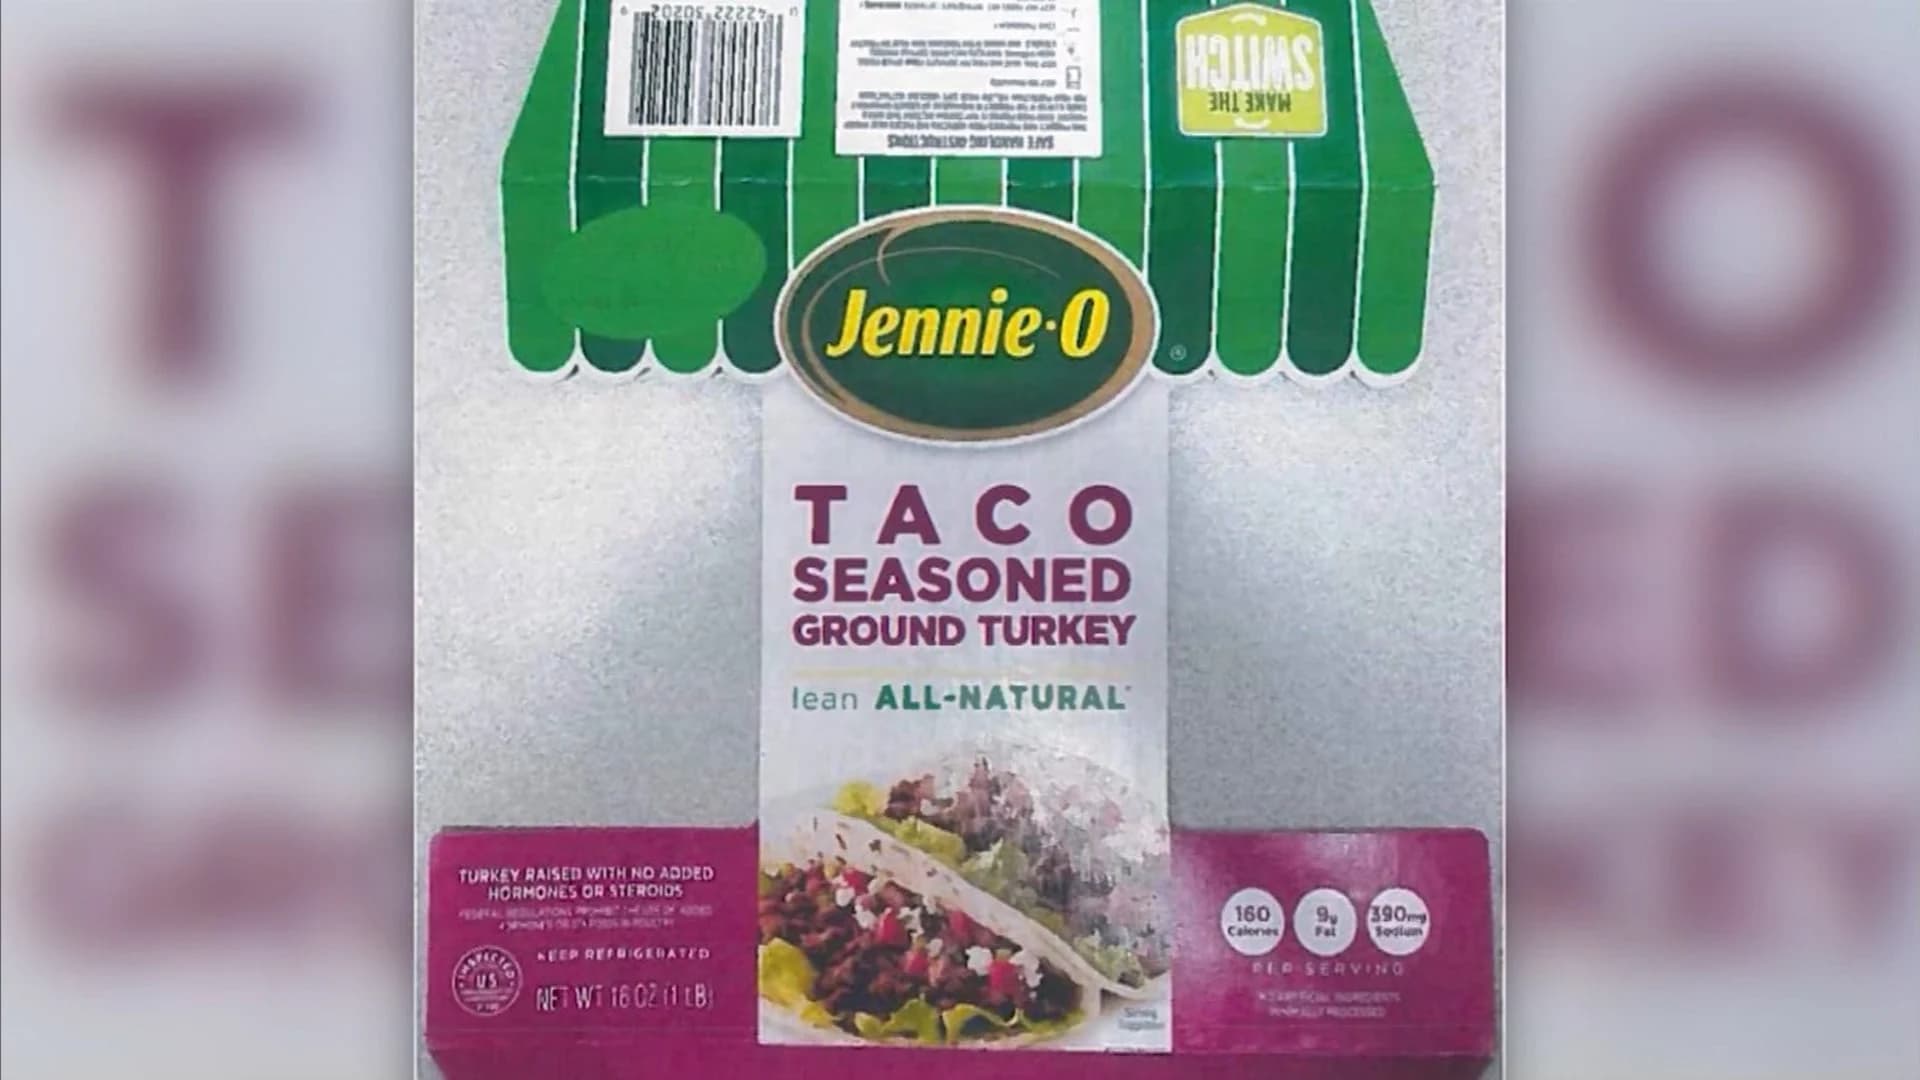 Over 91,000 pounds of ground turkey recalled for possible salmonella